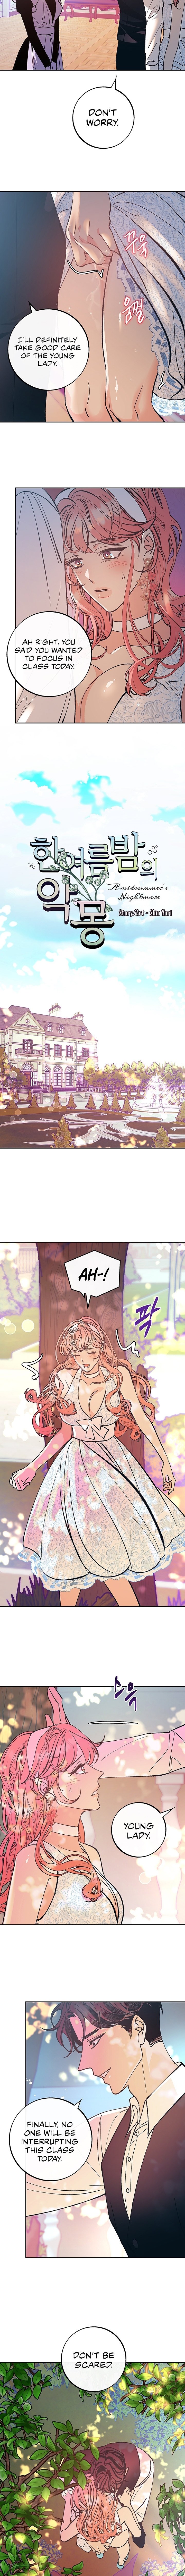 the-memories-of-that-summer-day-chap-35-5